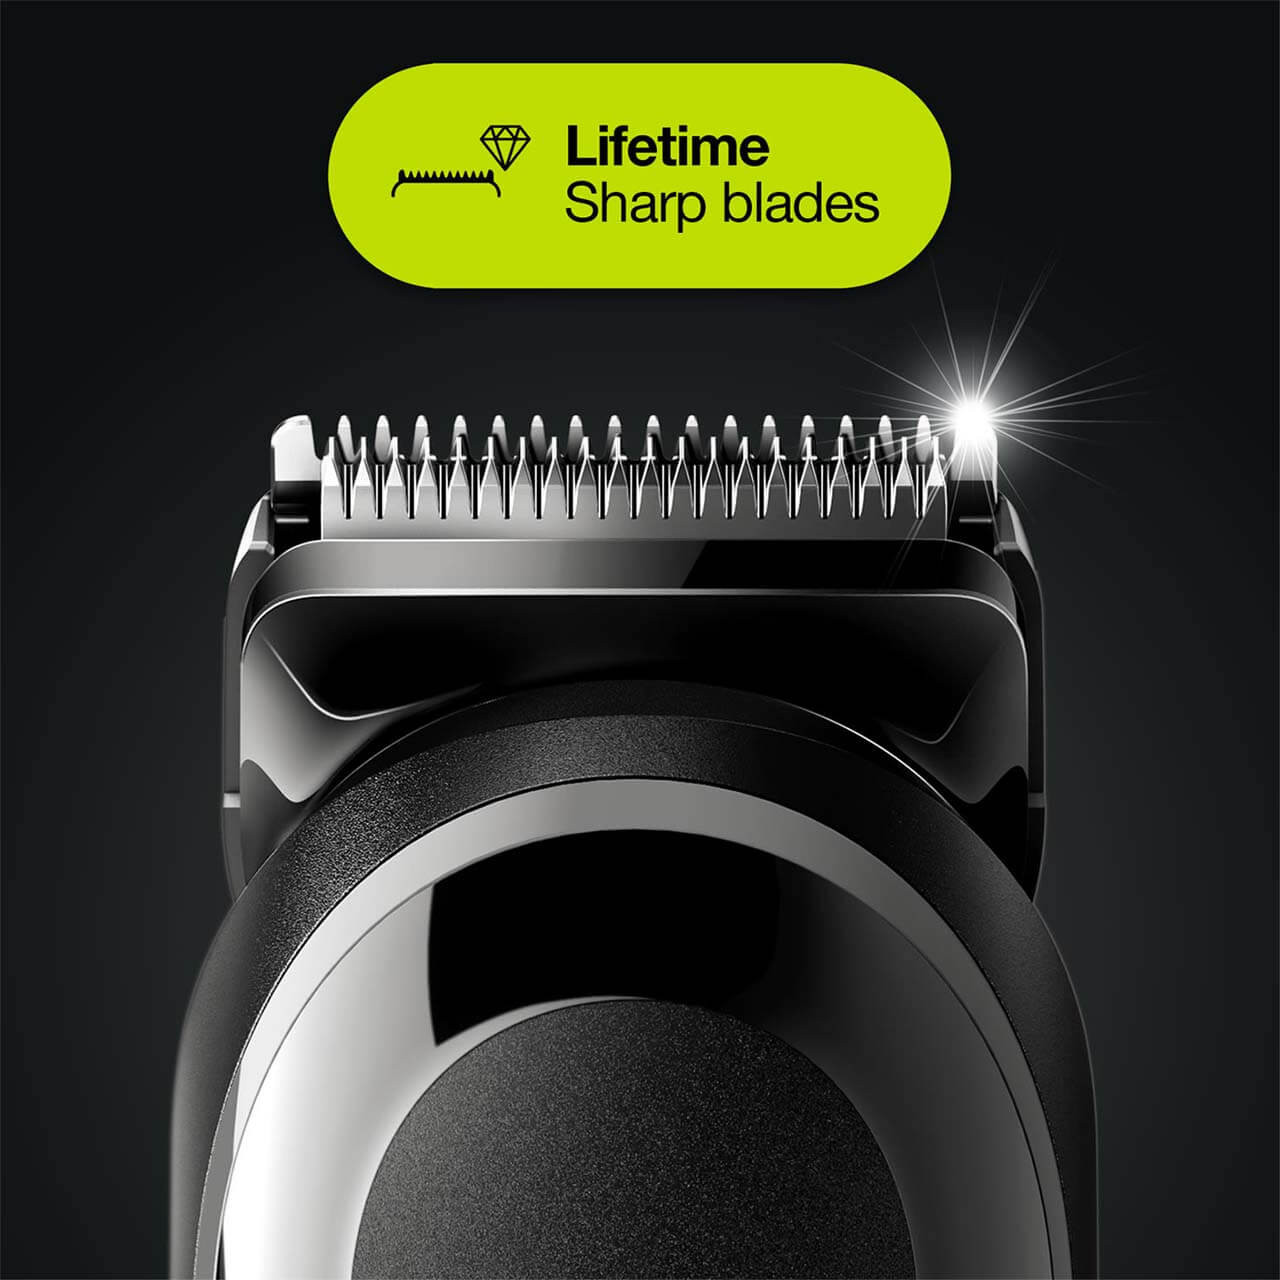 All-in-One trimmer 3 for Face, Hair, and Body, Black 6-in-1 styling kit,